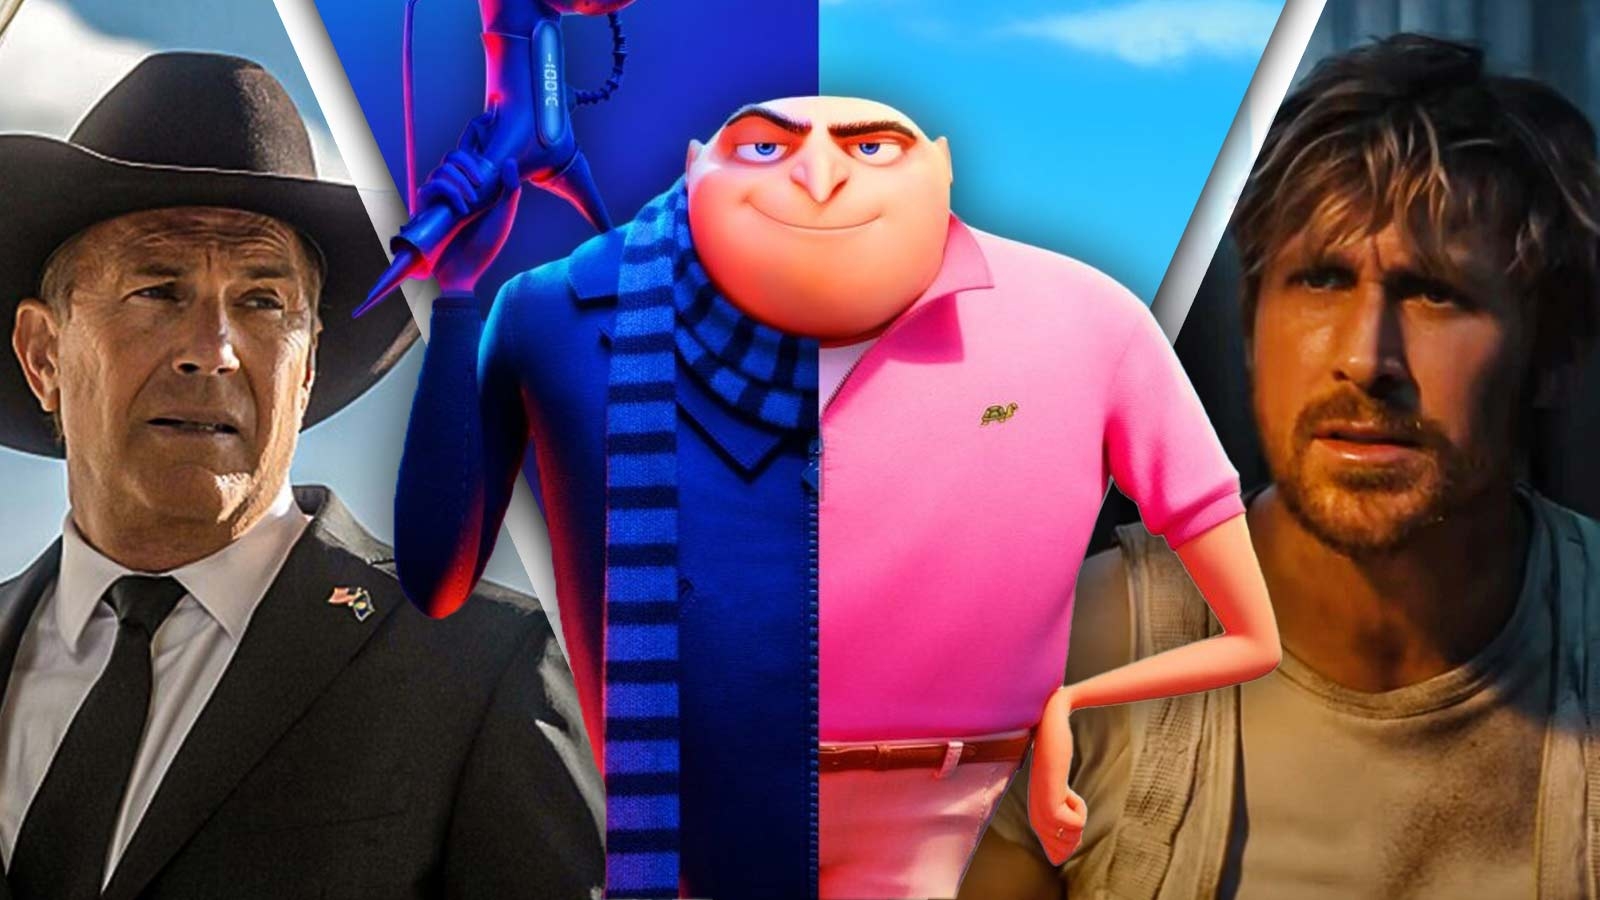 The Roaring Success of Steve Carell’s ‘Despicable Me 4’ is a Strong Sign For Both Kevin Costner and Ryan Gosling to Make a 180° Turn to Save Their Careers